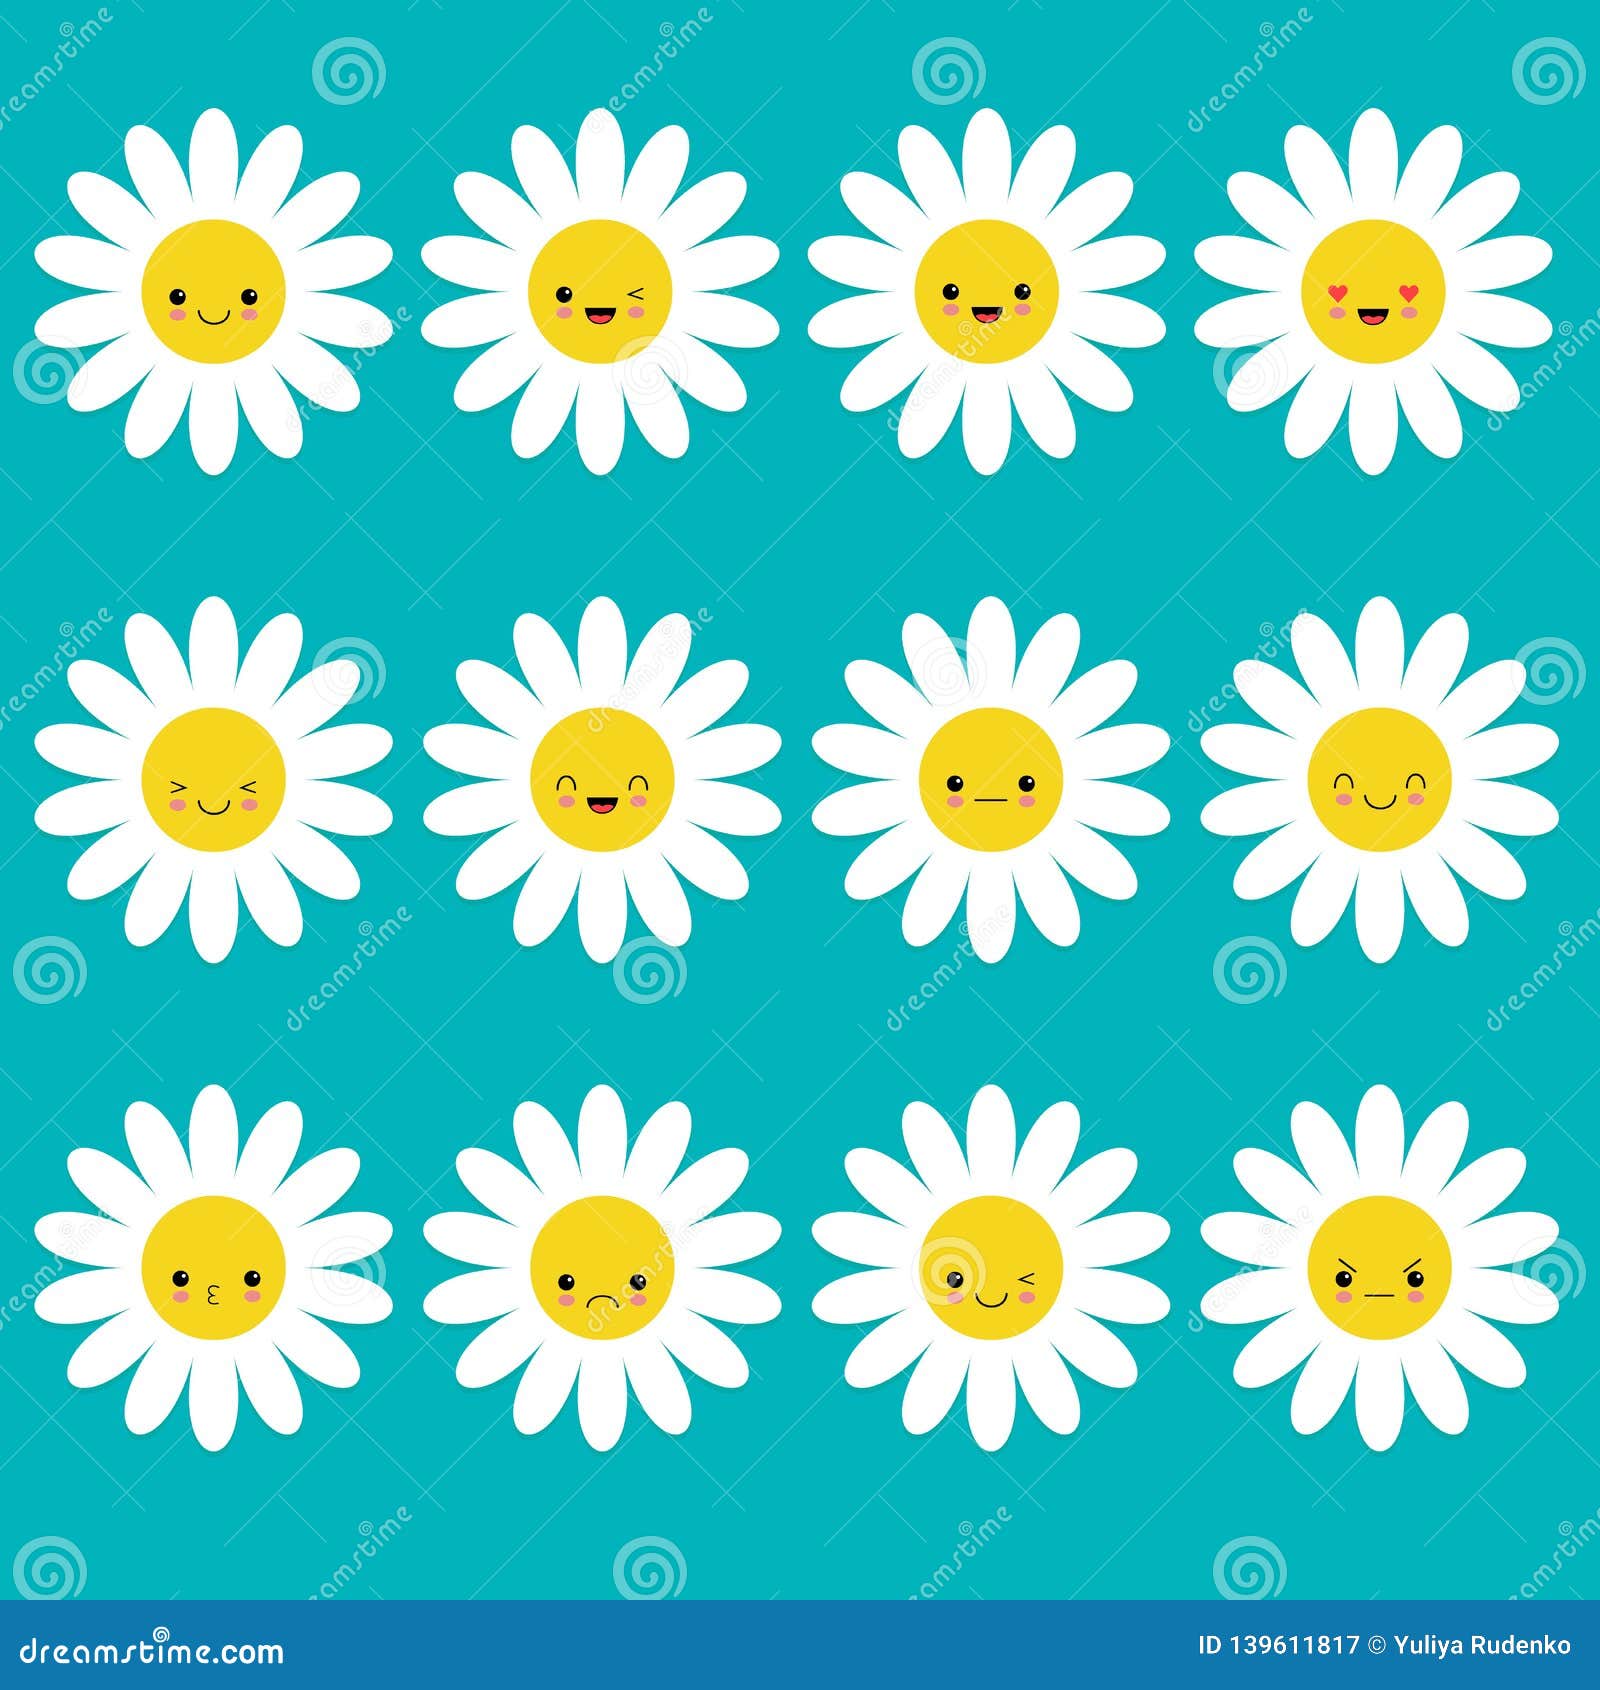 White Daisy Chamomile Icon Emoji Set Set Funny Kawaii Cartoon Characters Emotion Collection Stock Vector Illustration Of Growth Camomile 139611817